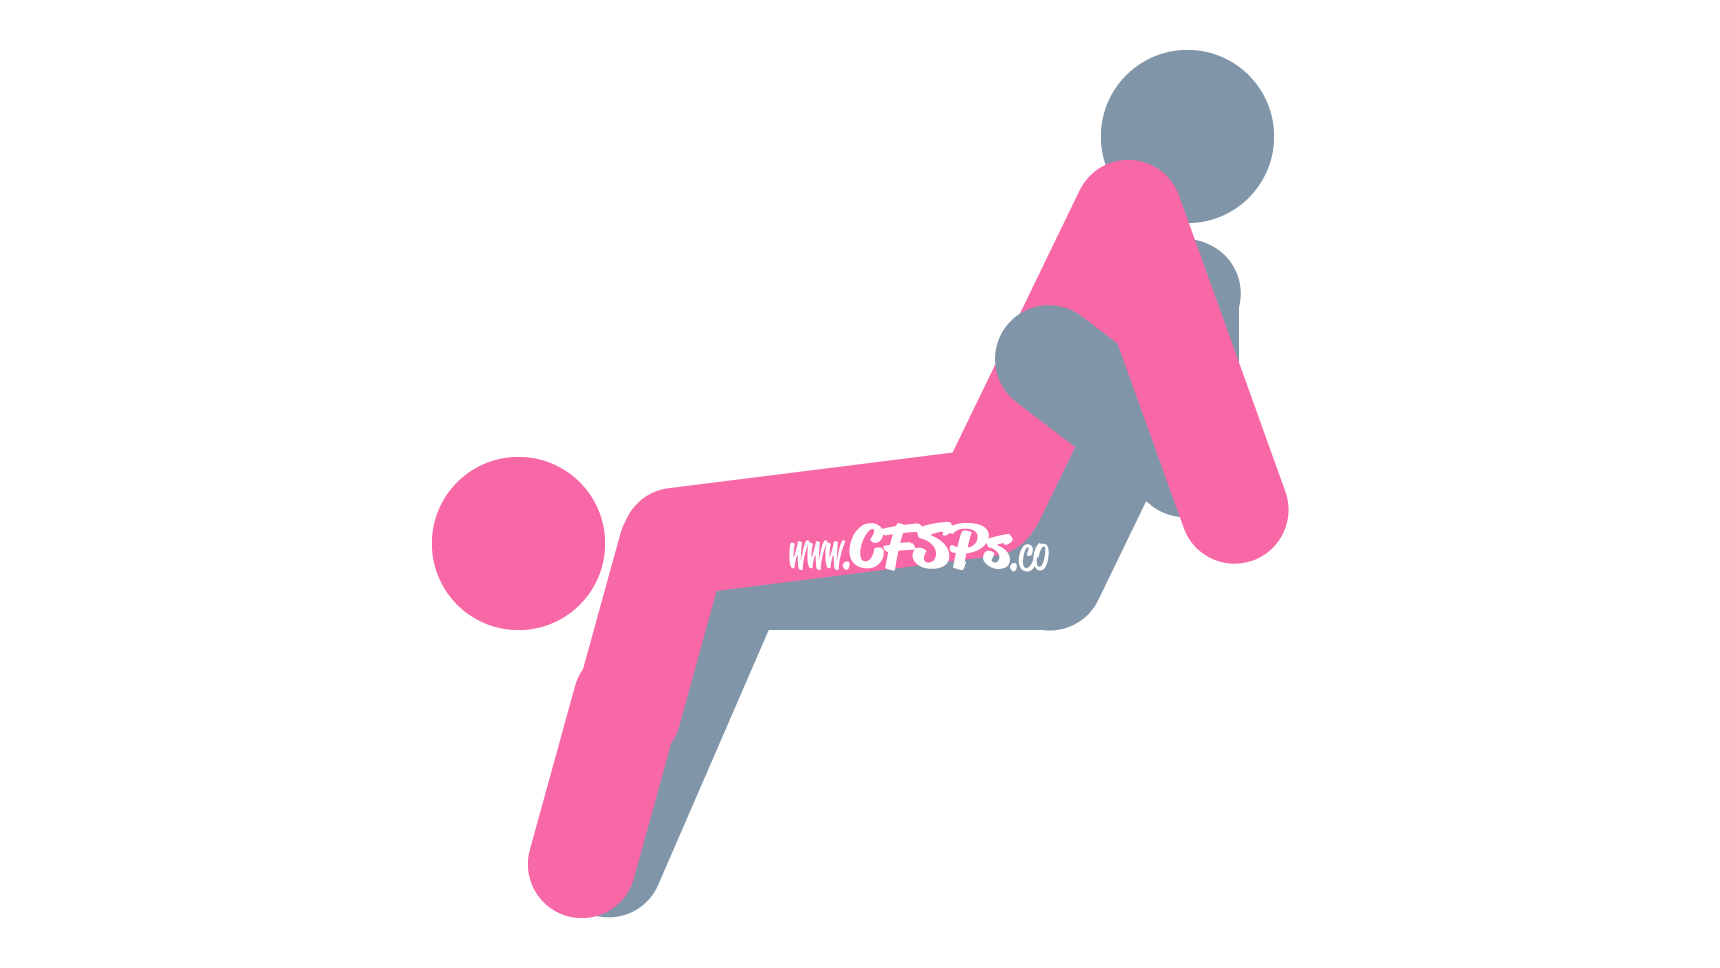 This stick figure image depicts a man and woman having sex in the Backwards Slide sex position. The man is sitting on the couch or sofa with his legs closed. The woman is positioned with her pelvis on his bent knees near his shoulders, and her head is handing off the edge of the seat.